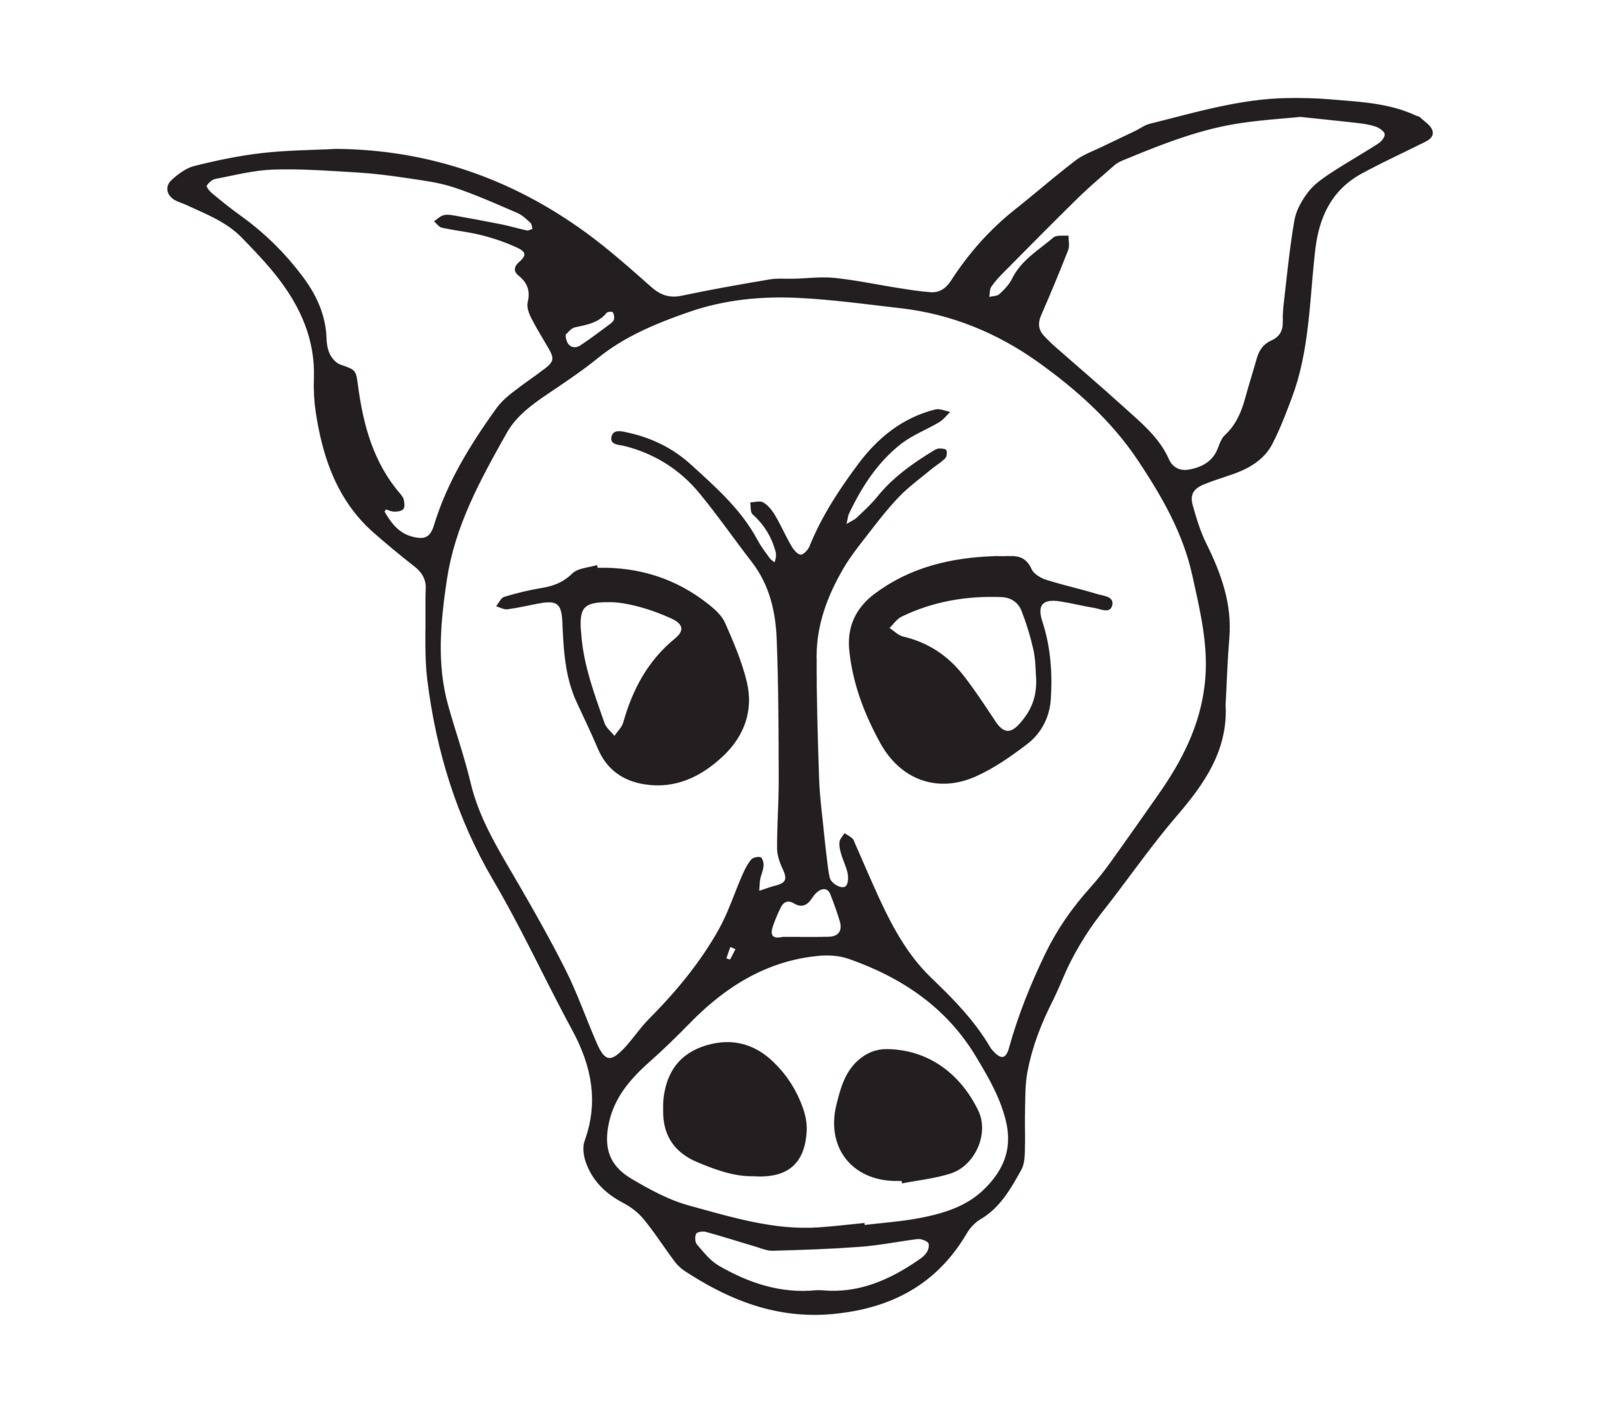 Head of pig animal. Sketch, isolated on white background.